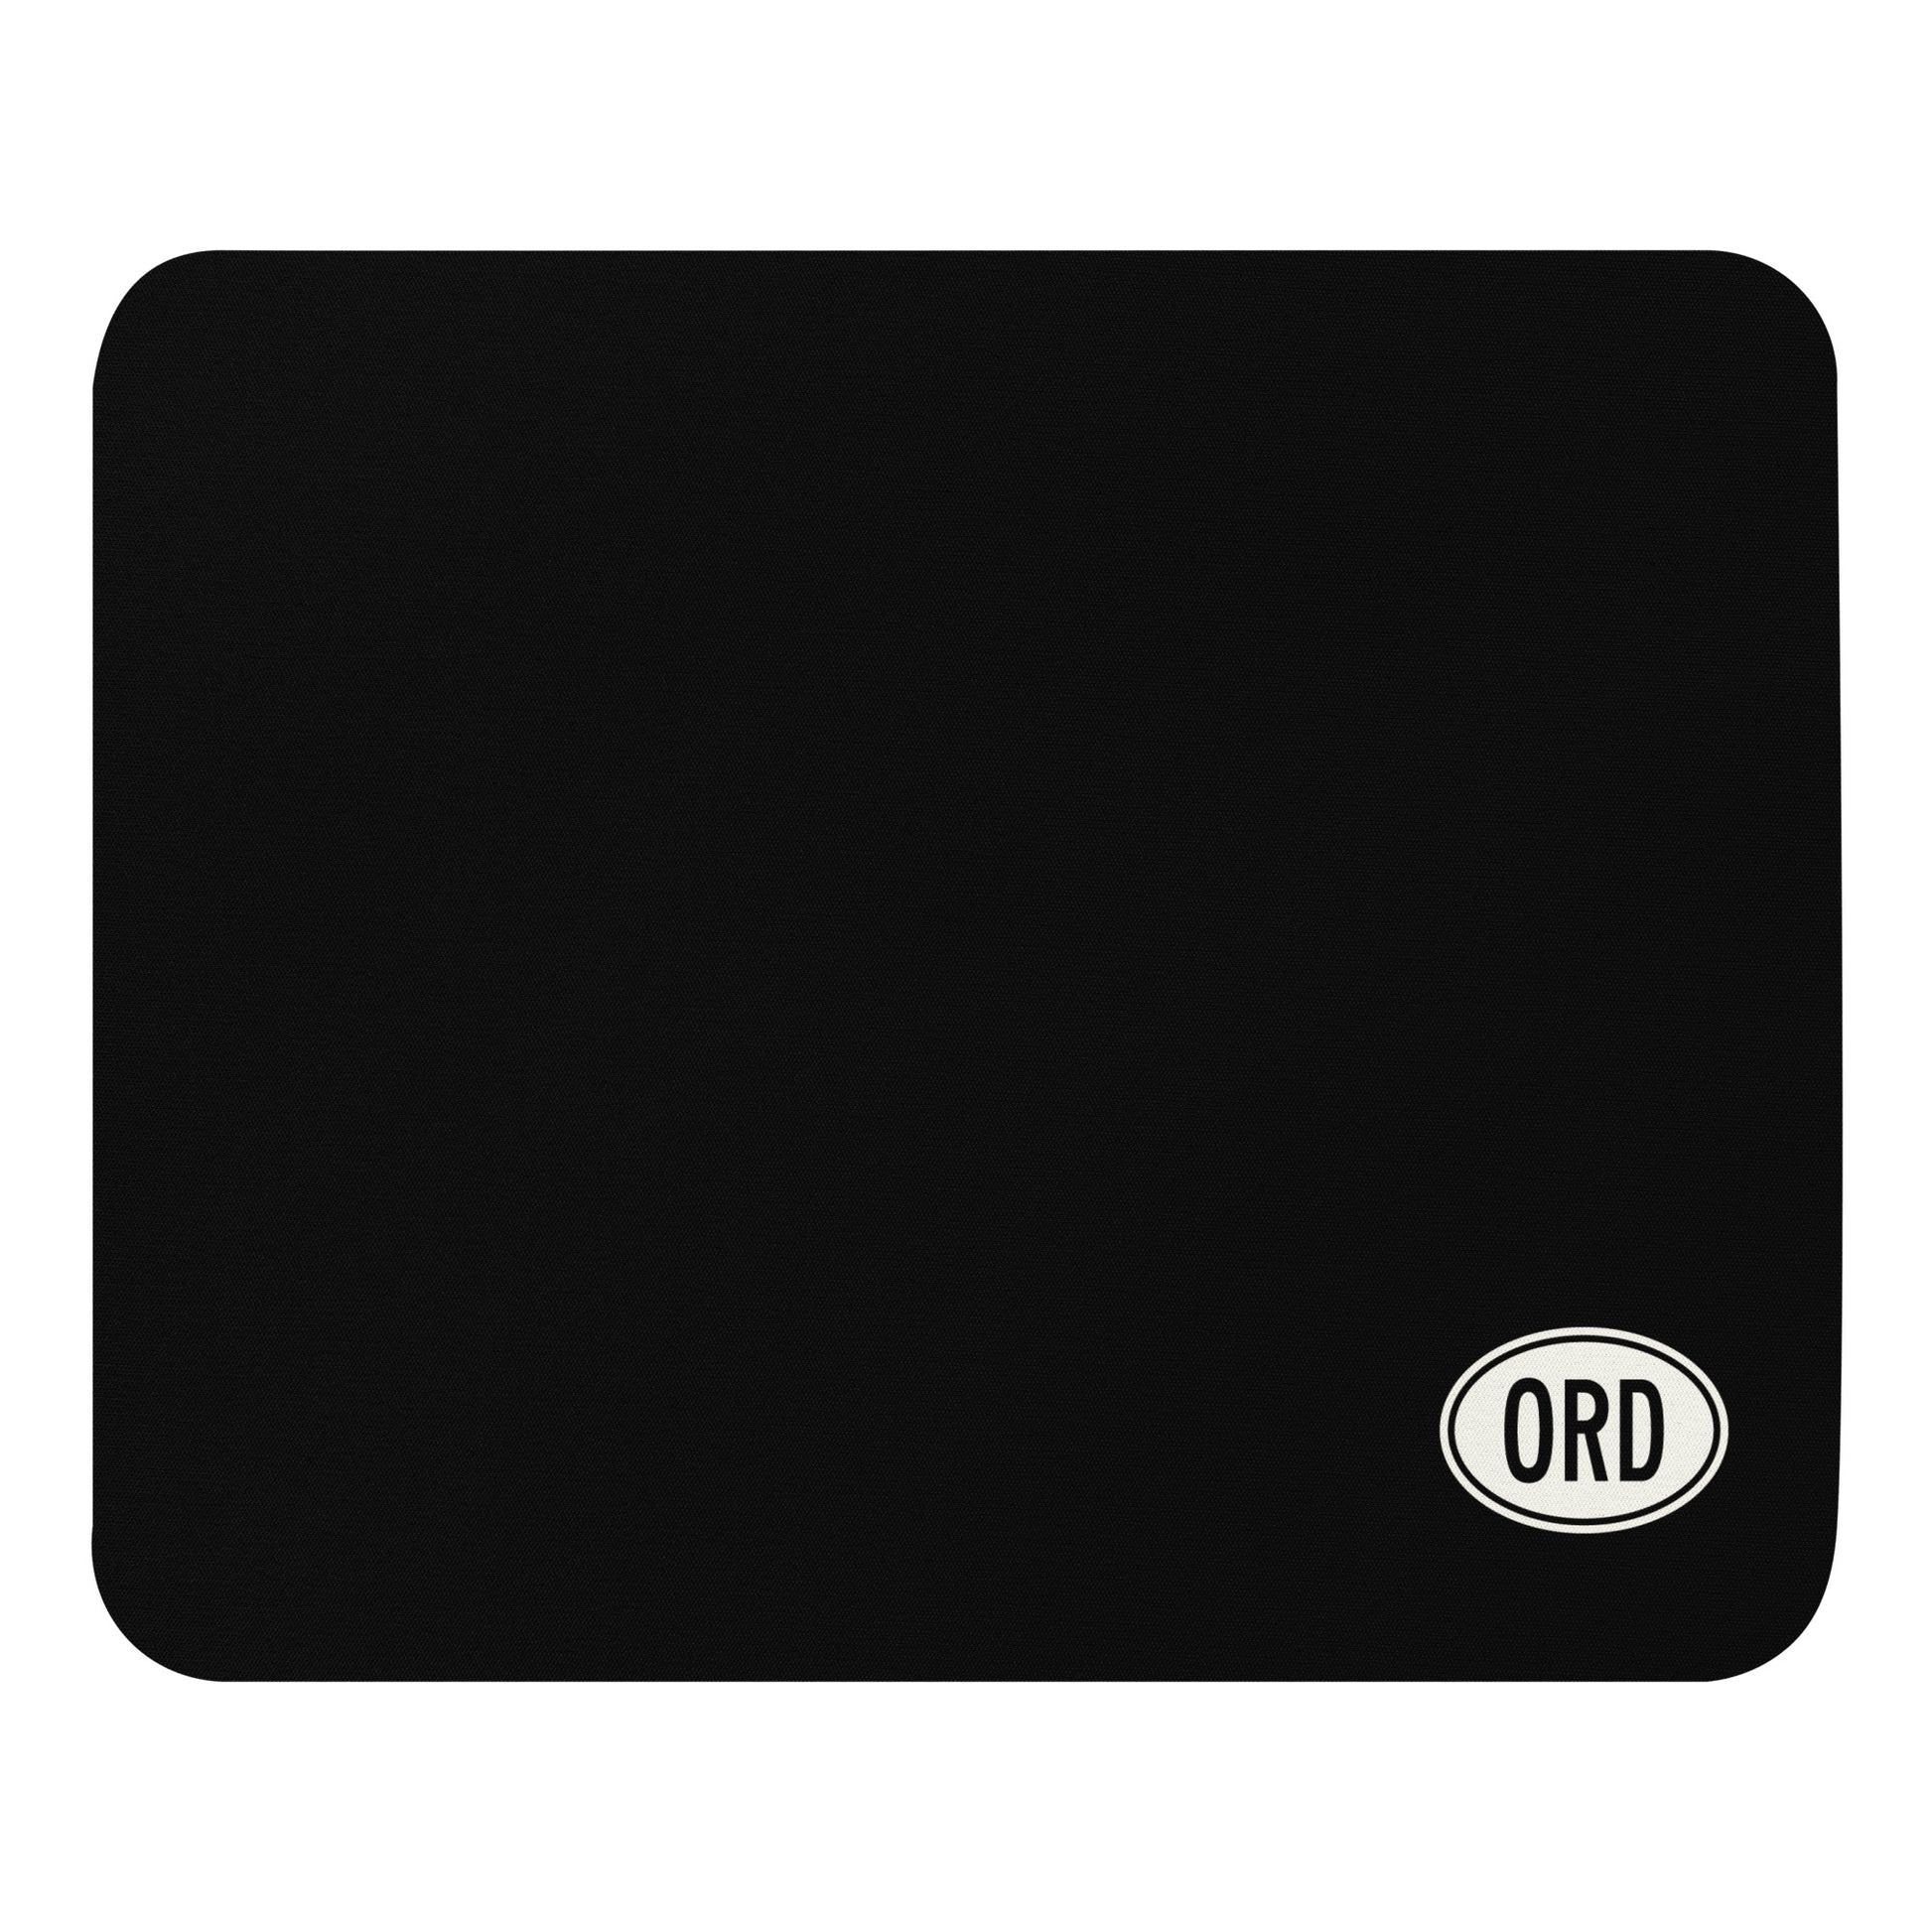 Unique Travel Gift Mouse Pad - White Oval • ORD Chicago • YHM Designs - Image 01